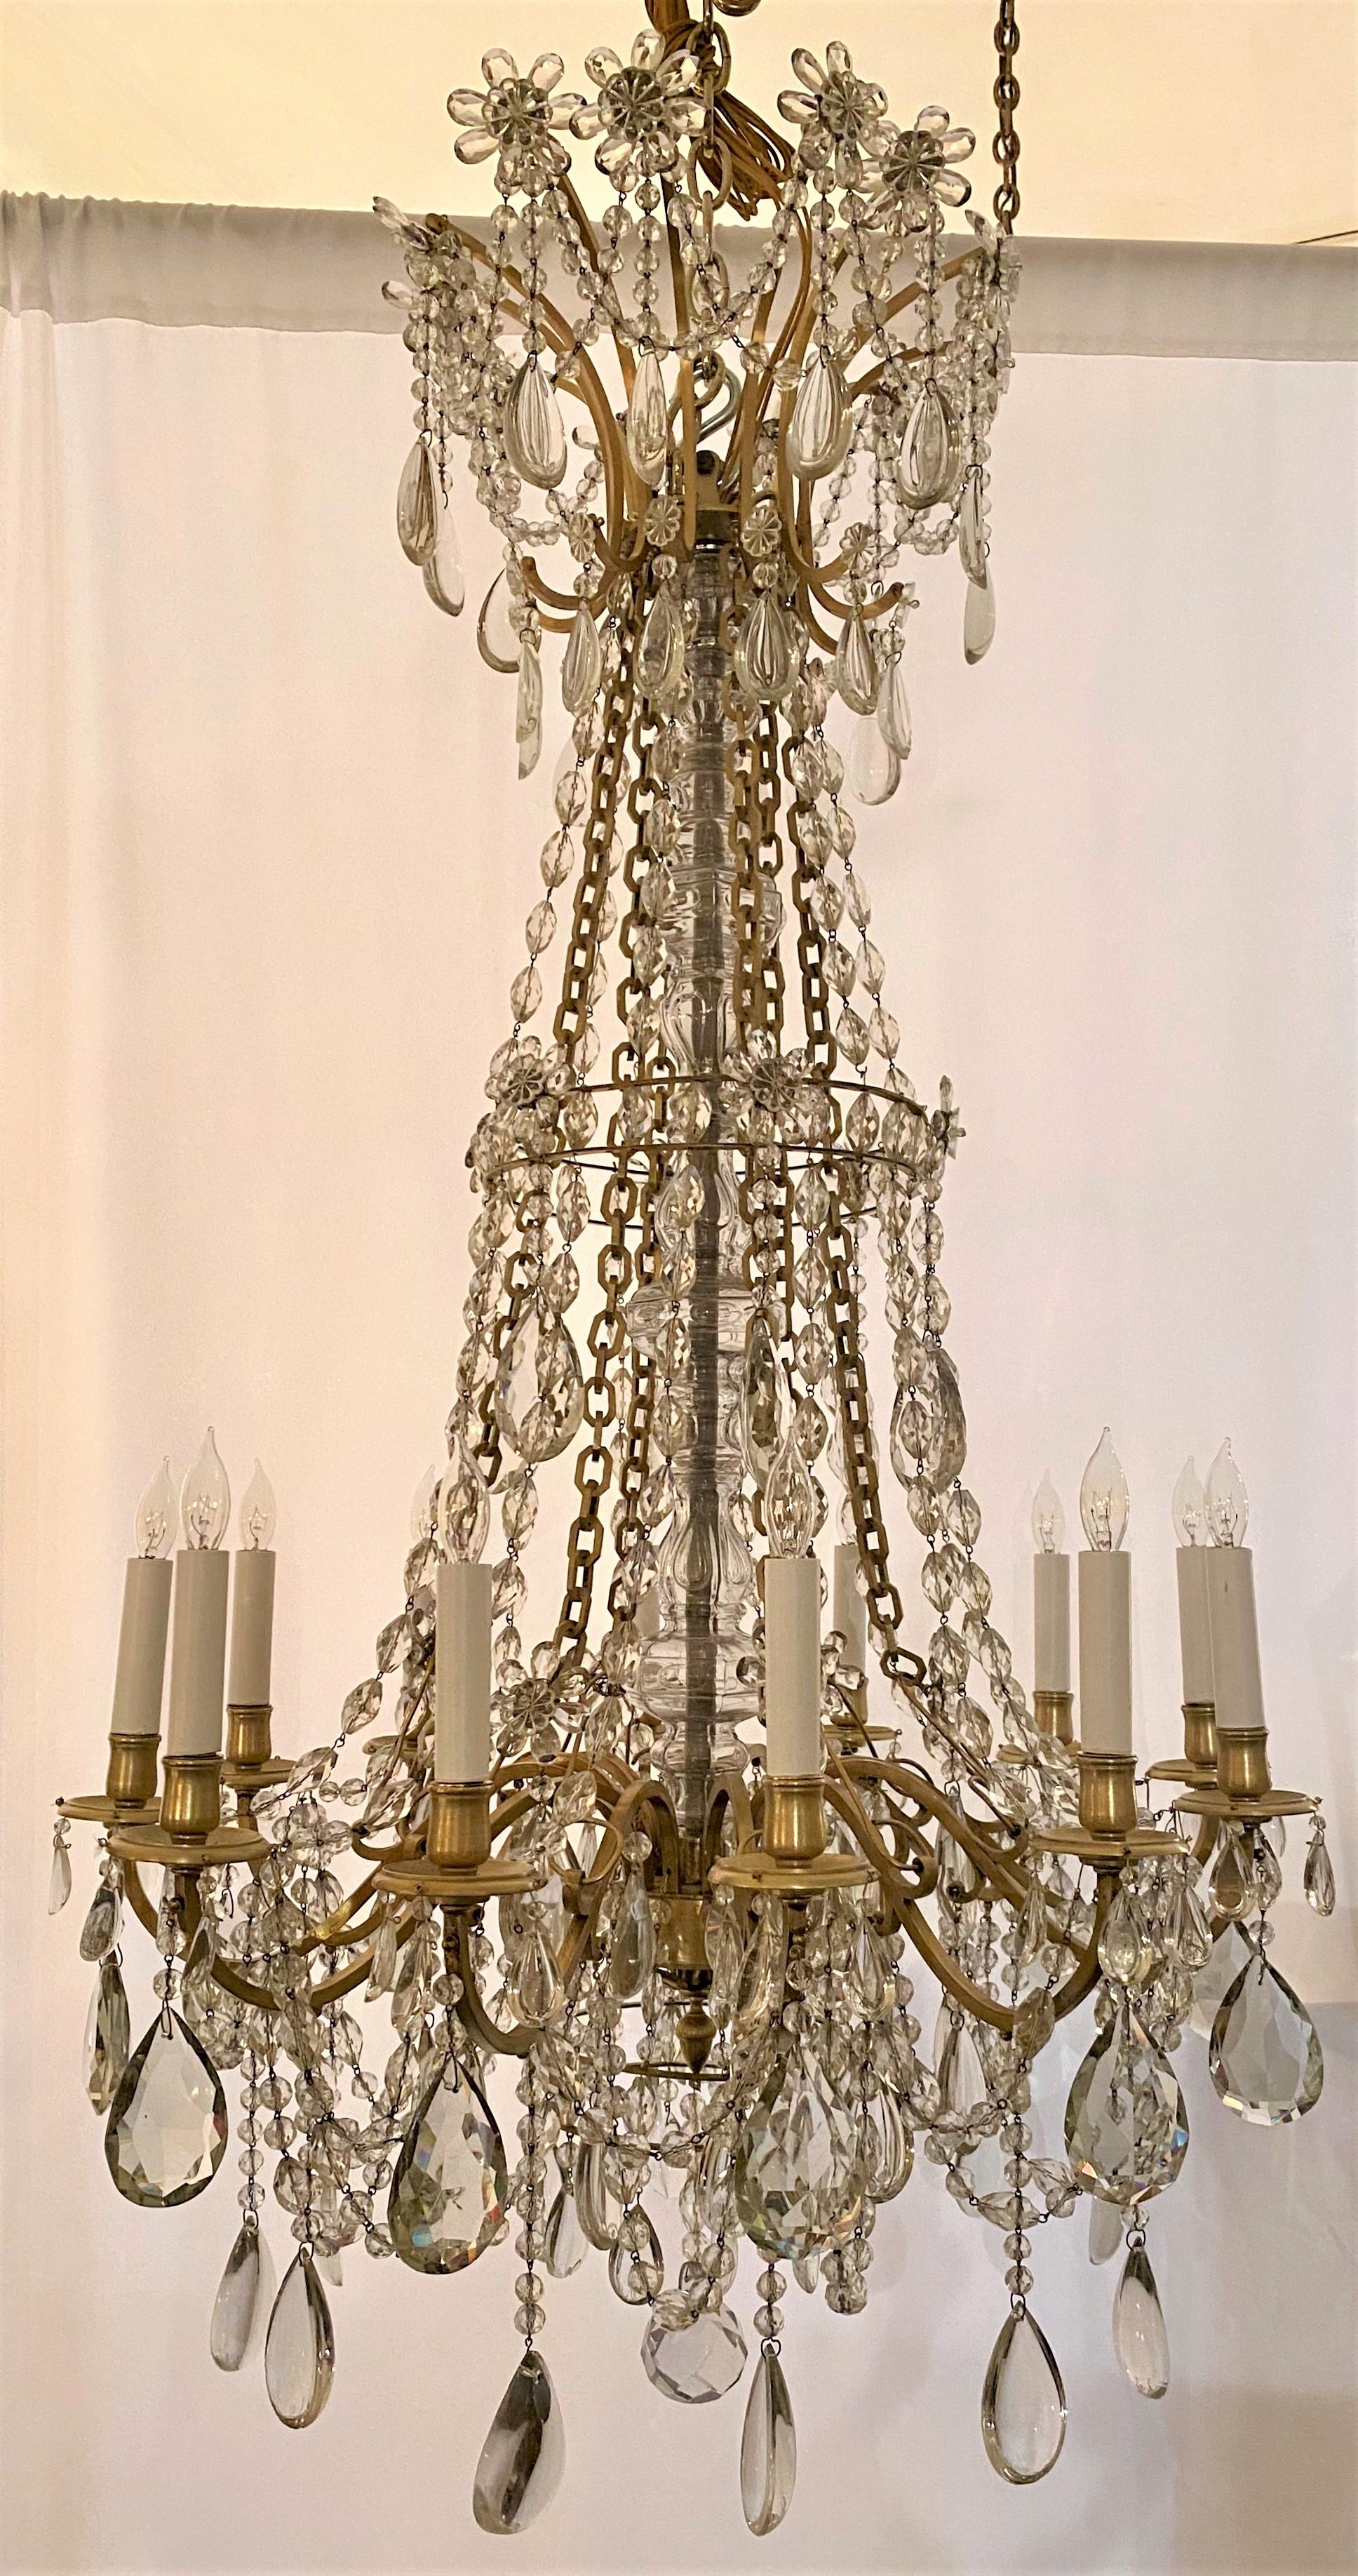 Antique French Baccarat crystal and bronze D'Ore chandelier, circa 1890.
CHC316.